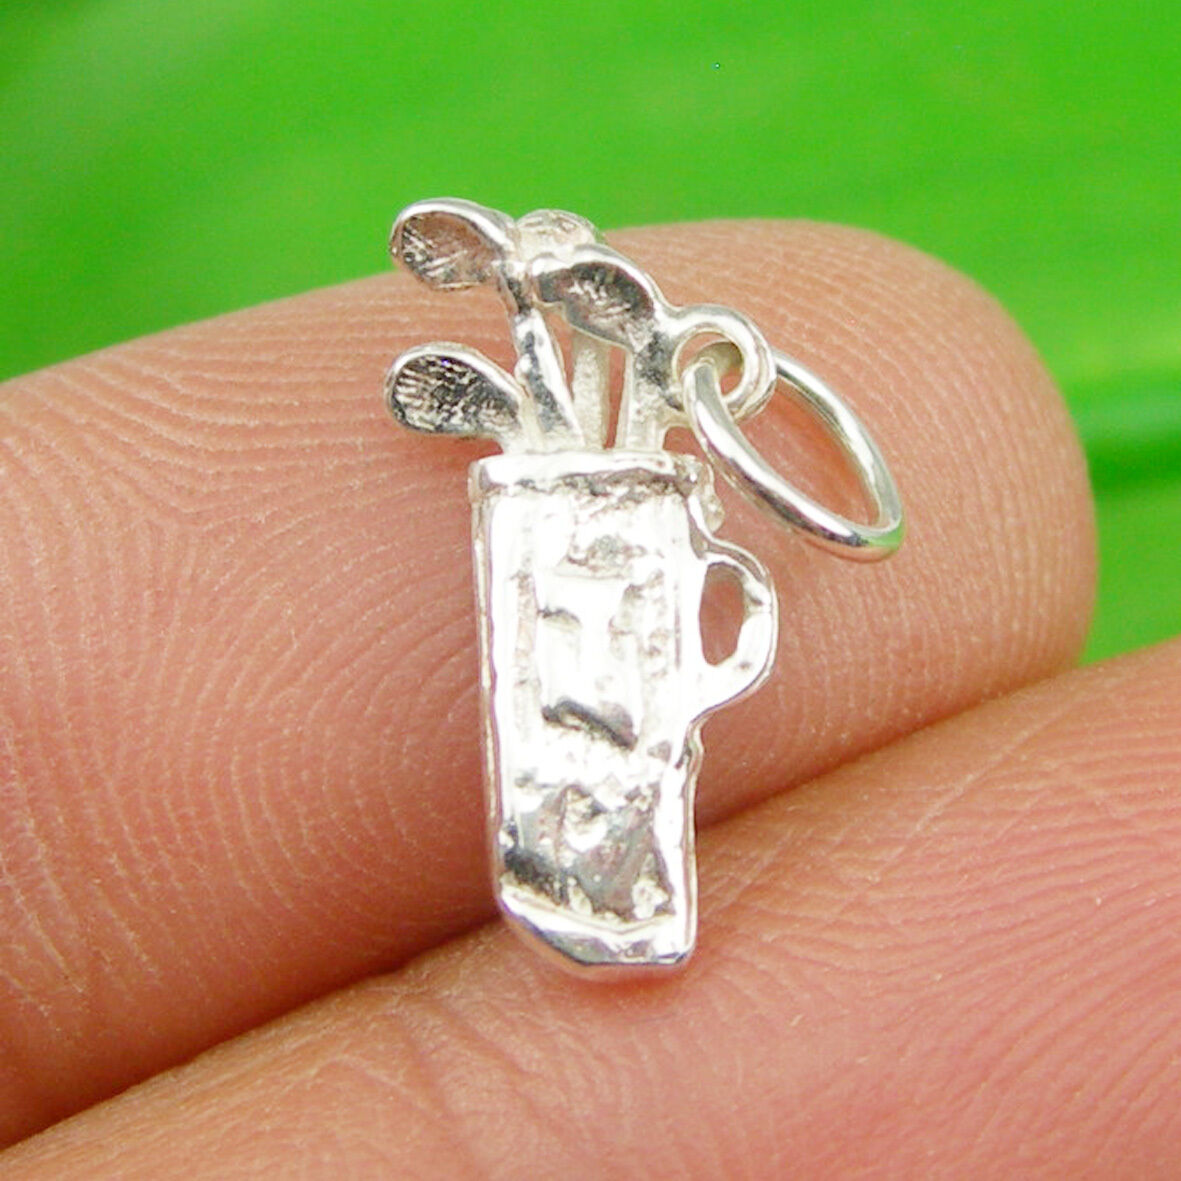 Golf Bag & Clubs Sport Small Charm Pendant Genuine 925 Sterling Silver, C250